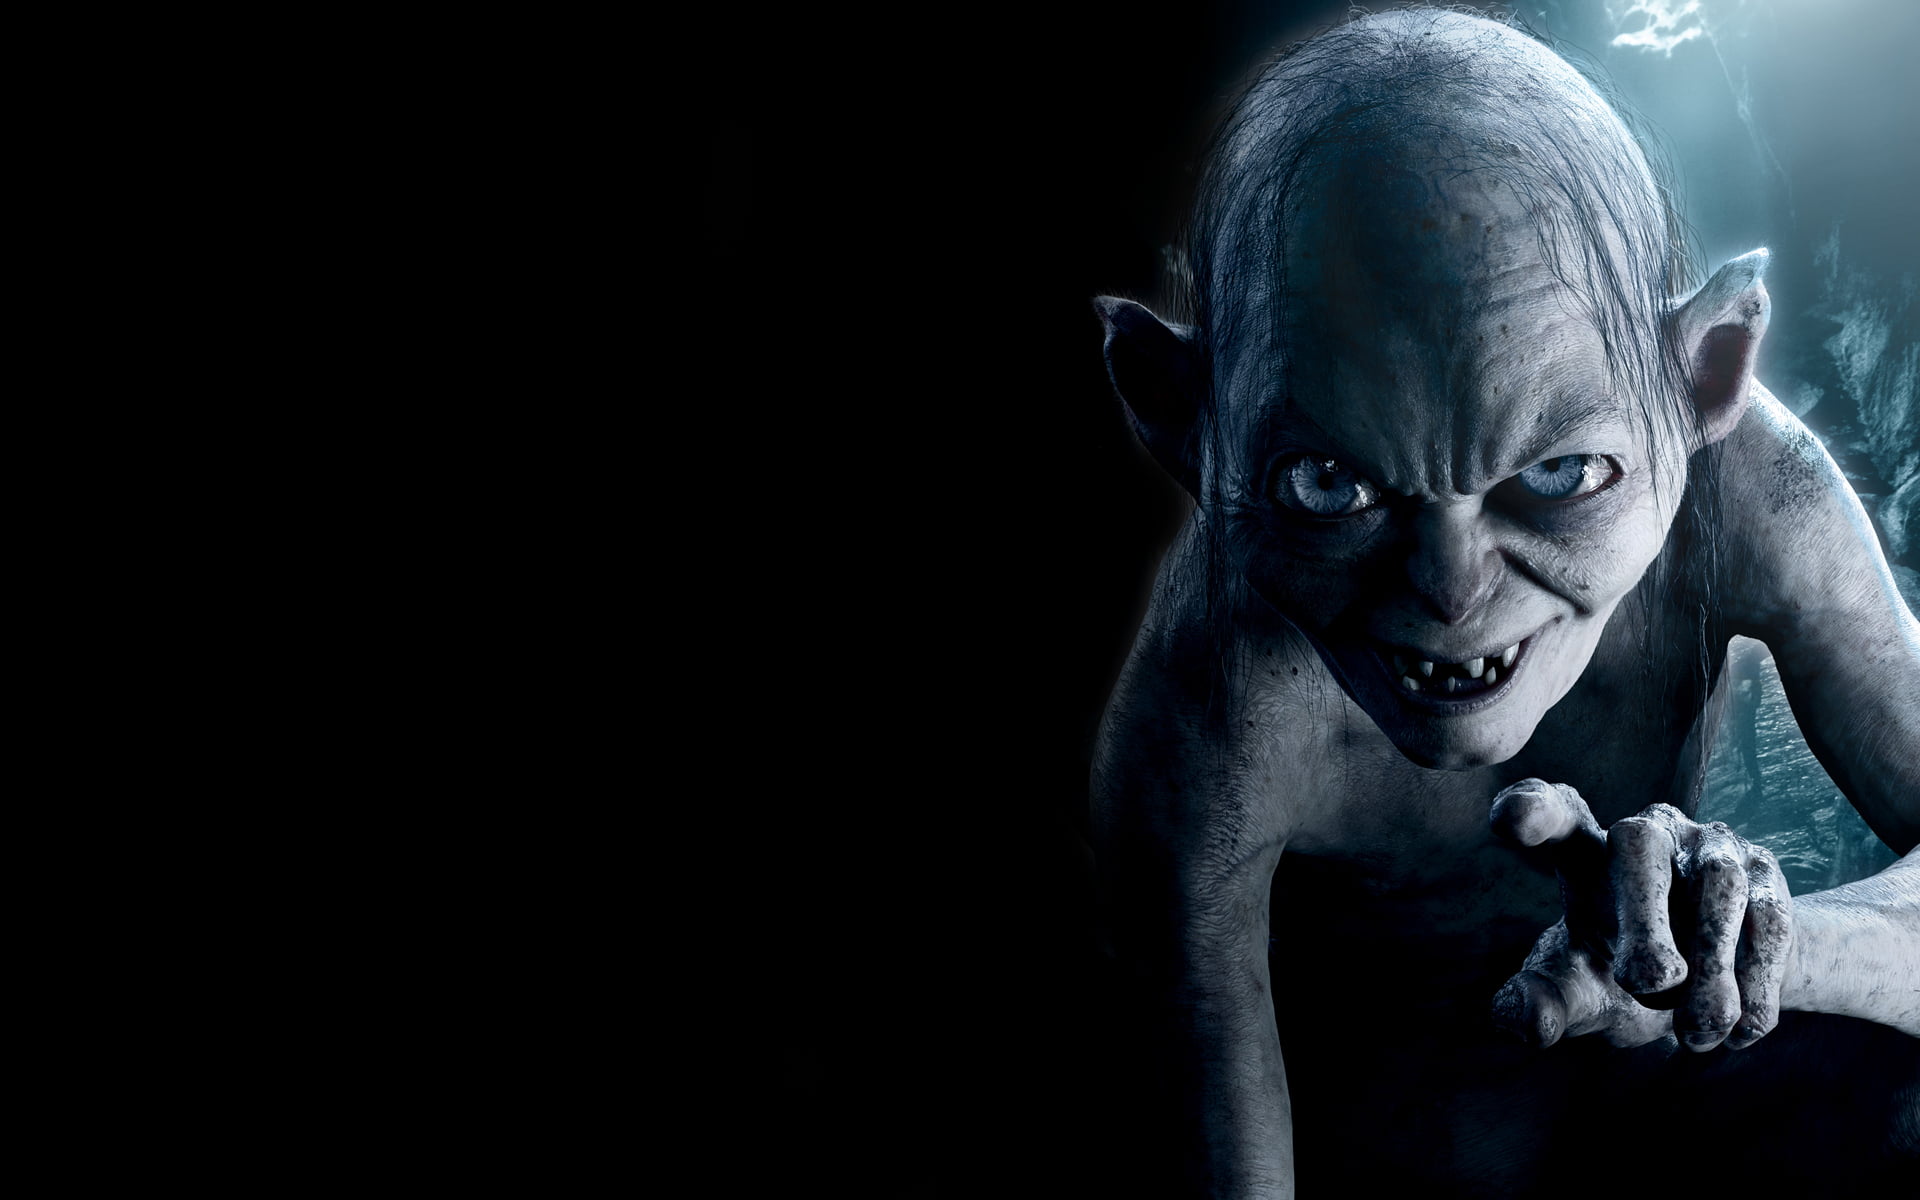 Lord of the Rings Gollum wallpaper, The Lord of the Rings, The Hobbit An Unexpected Journey